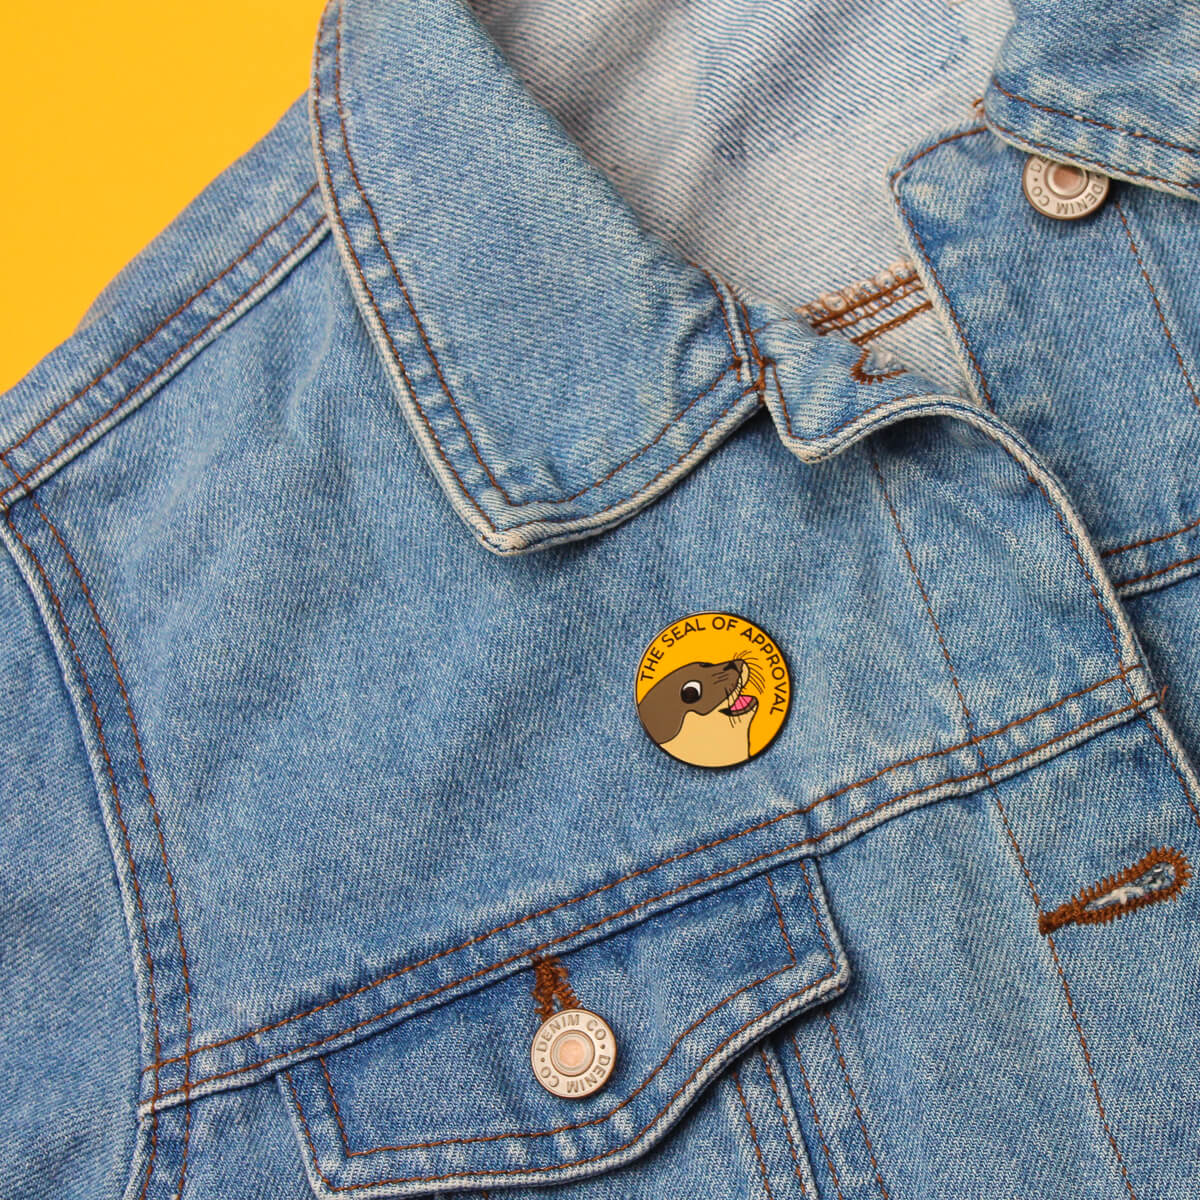 The Seal of Approval Enamel Pin | Extreme Largeness Wholesale